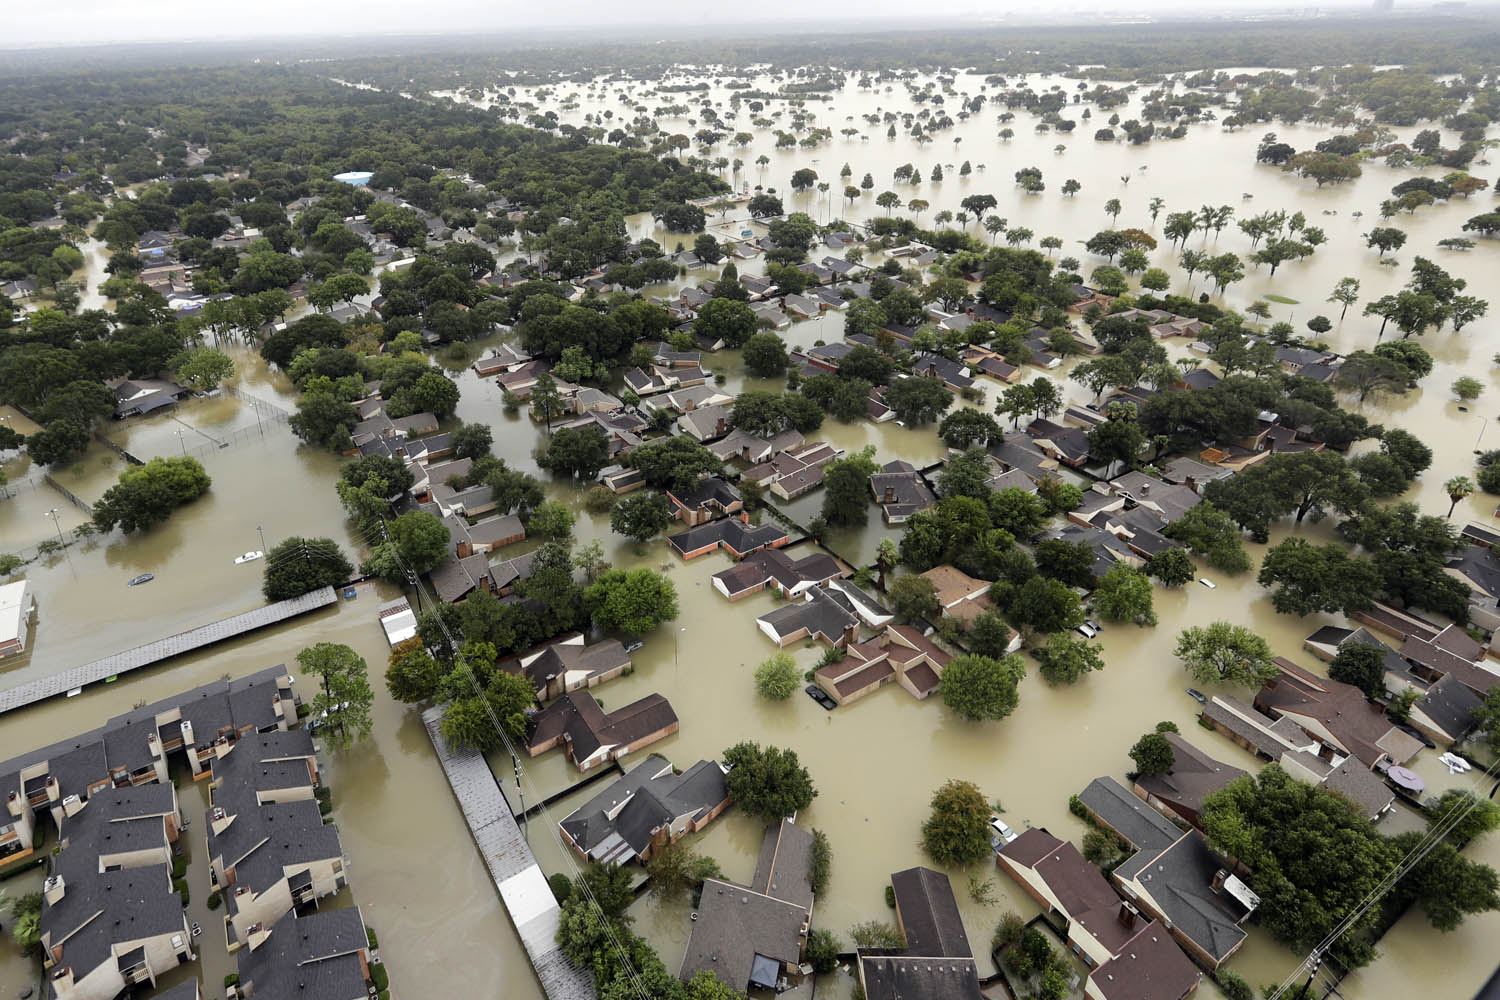 Water from Addicks Reservoir flows into neighborhoods as floodwaters from Tropical Storm Harvey rise Tuesday, Aug. 29 in Houston. (David J. Phillip/AP)